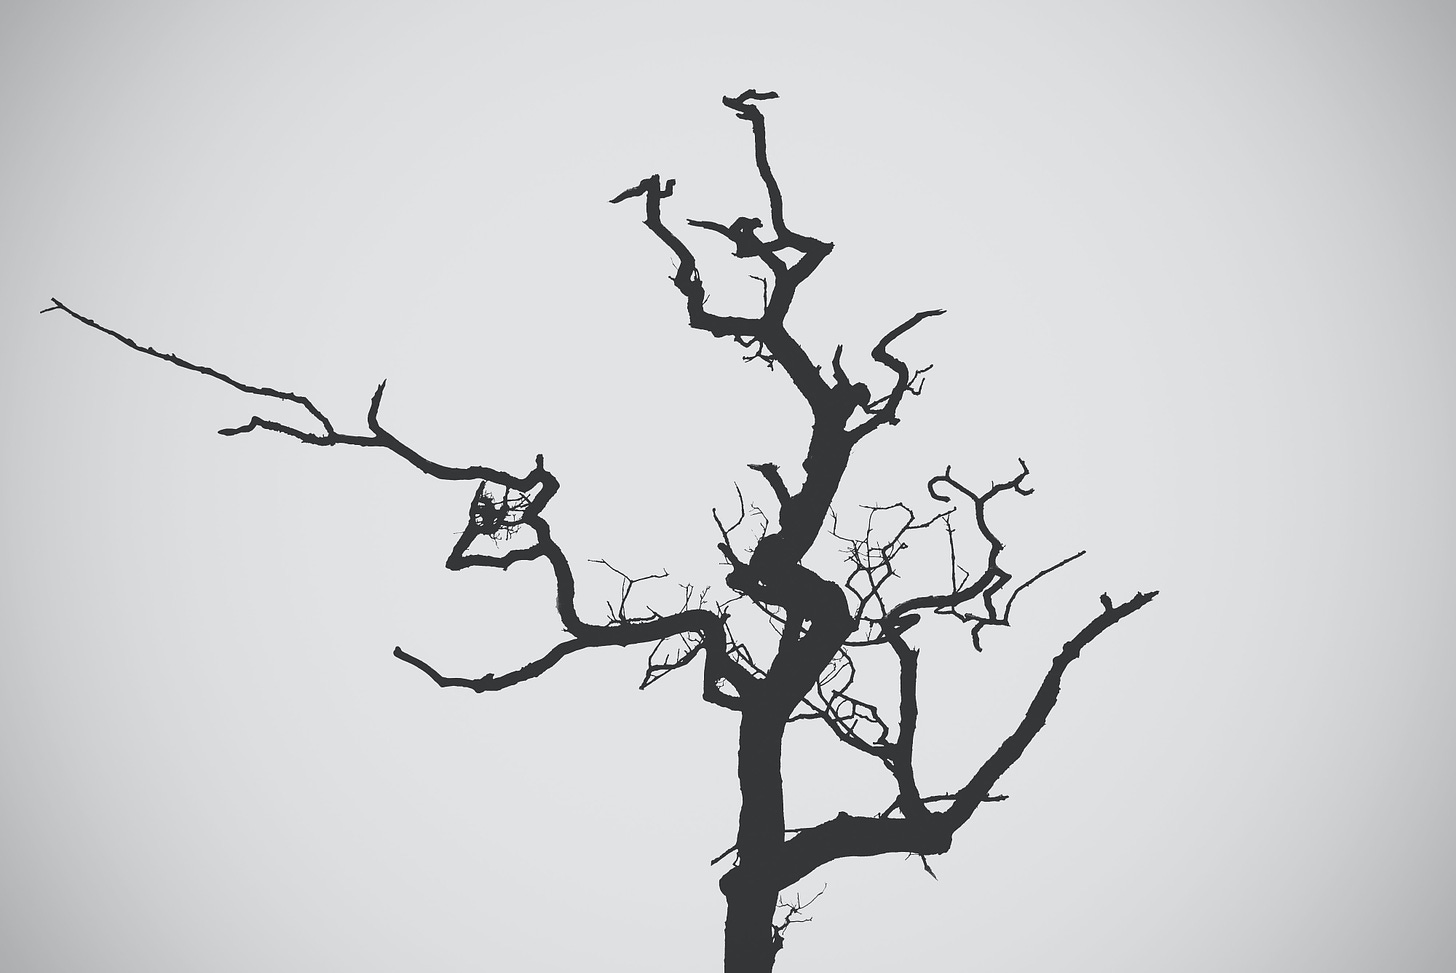 A leafless tree silhouette against a grey background.